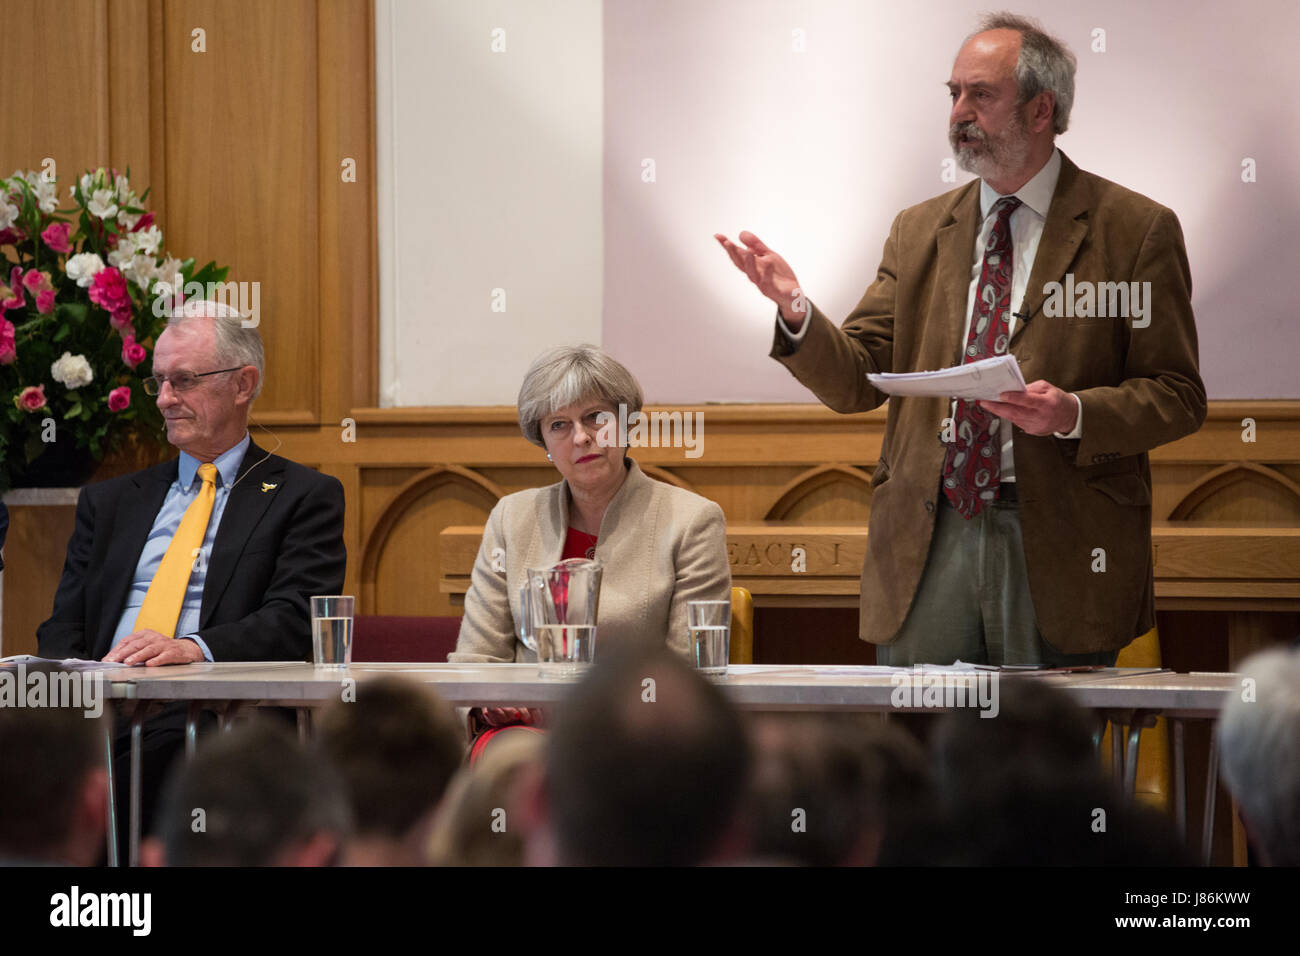 Maidenhead, UK. 27th May, 2017. Rabbi Dr Jonathan Romain (host) introduces a hustings event for the Maidenhead constituency for the forthcoming general election at the High Street Methodist Church, alongside (l-r)  Tony Hill (Liberal Democrat) and Theresa May (Conservative). Credit: Mark Kerrison/Alamy Live News Stock Photo